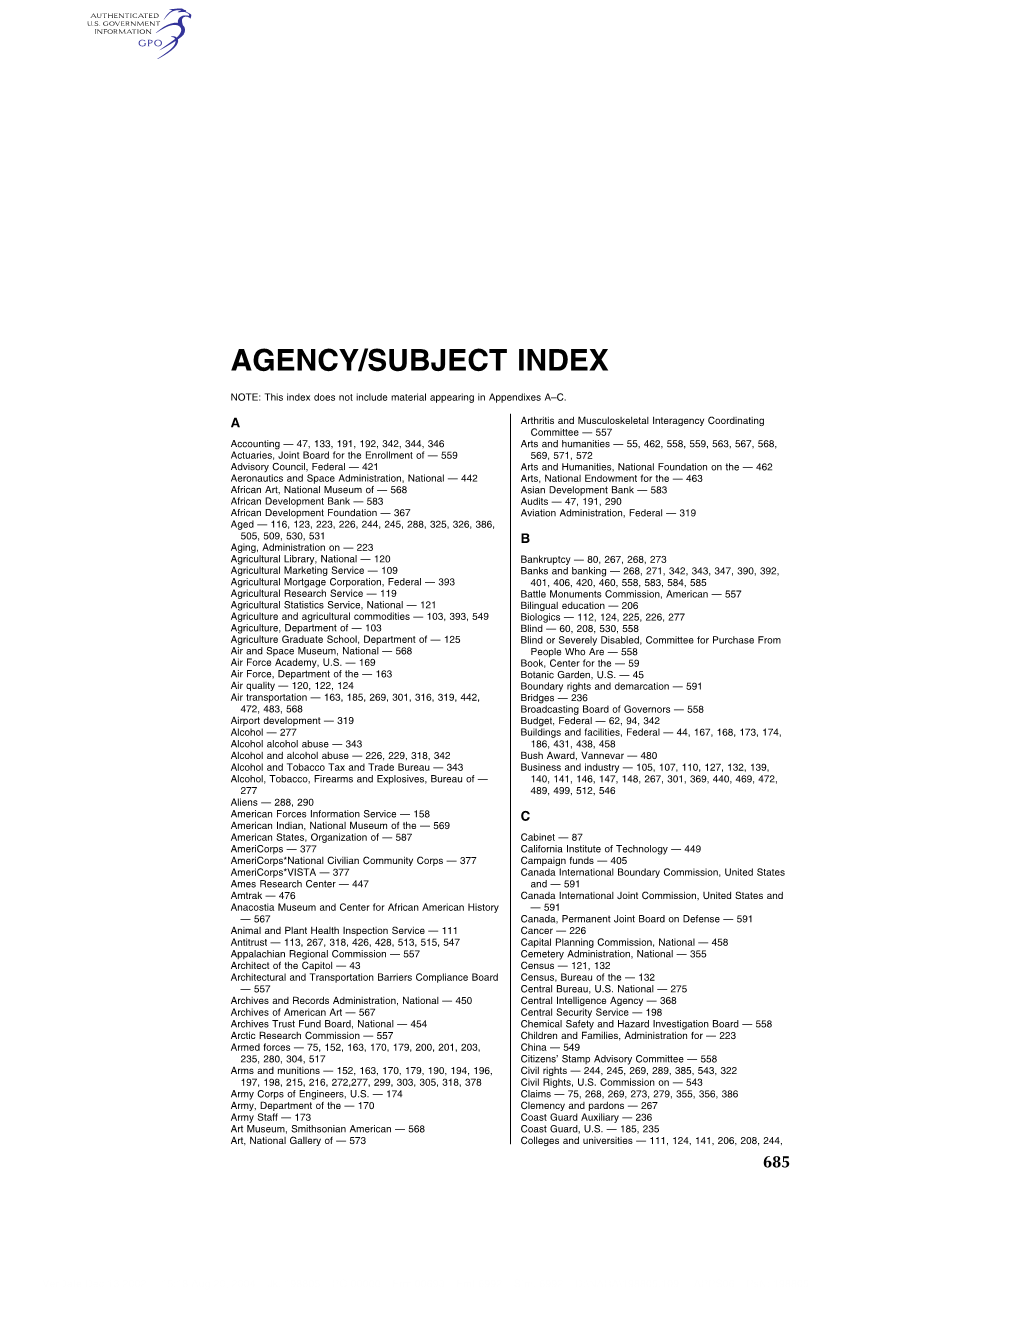 Agency/Subject Index